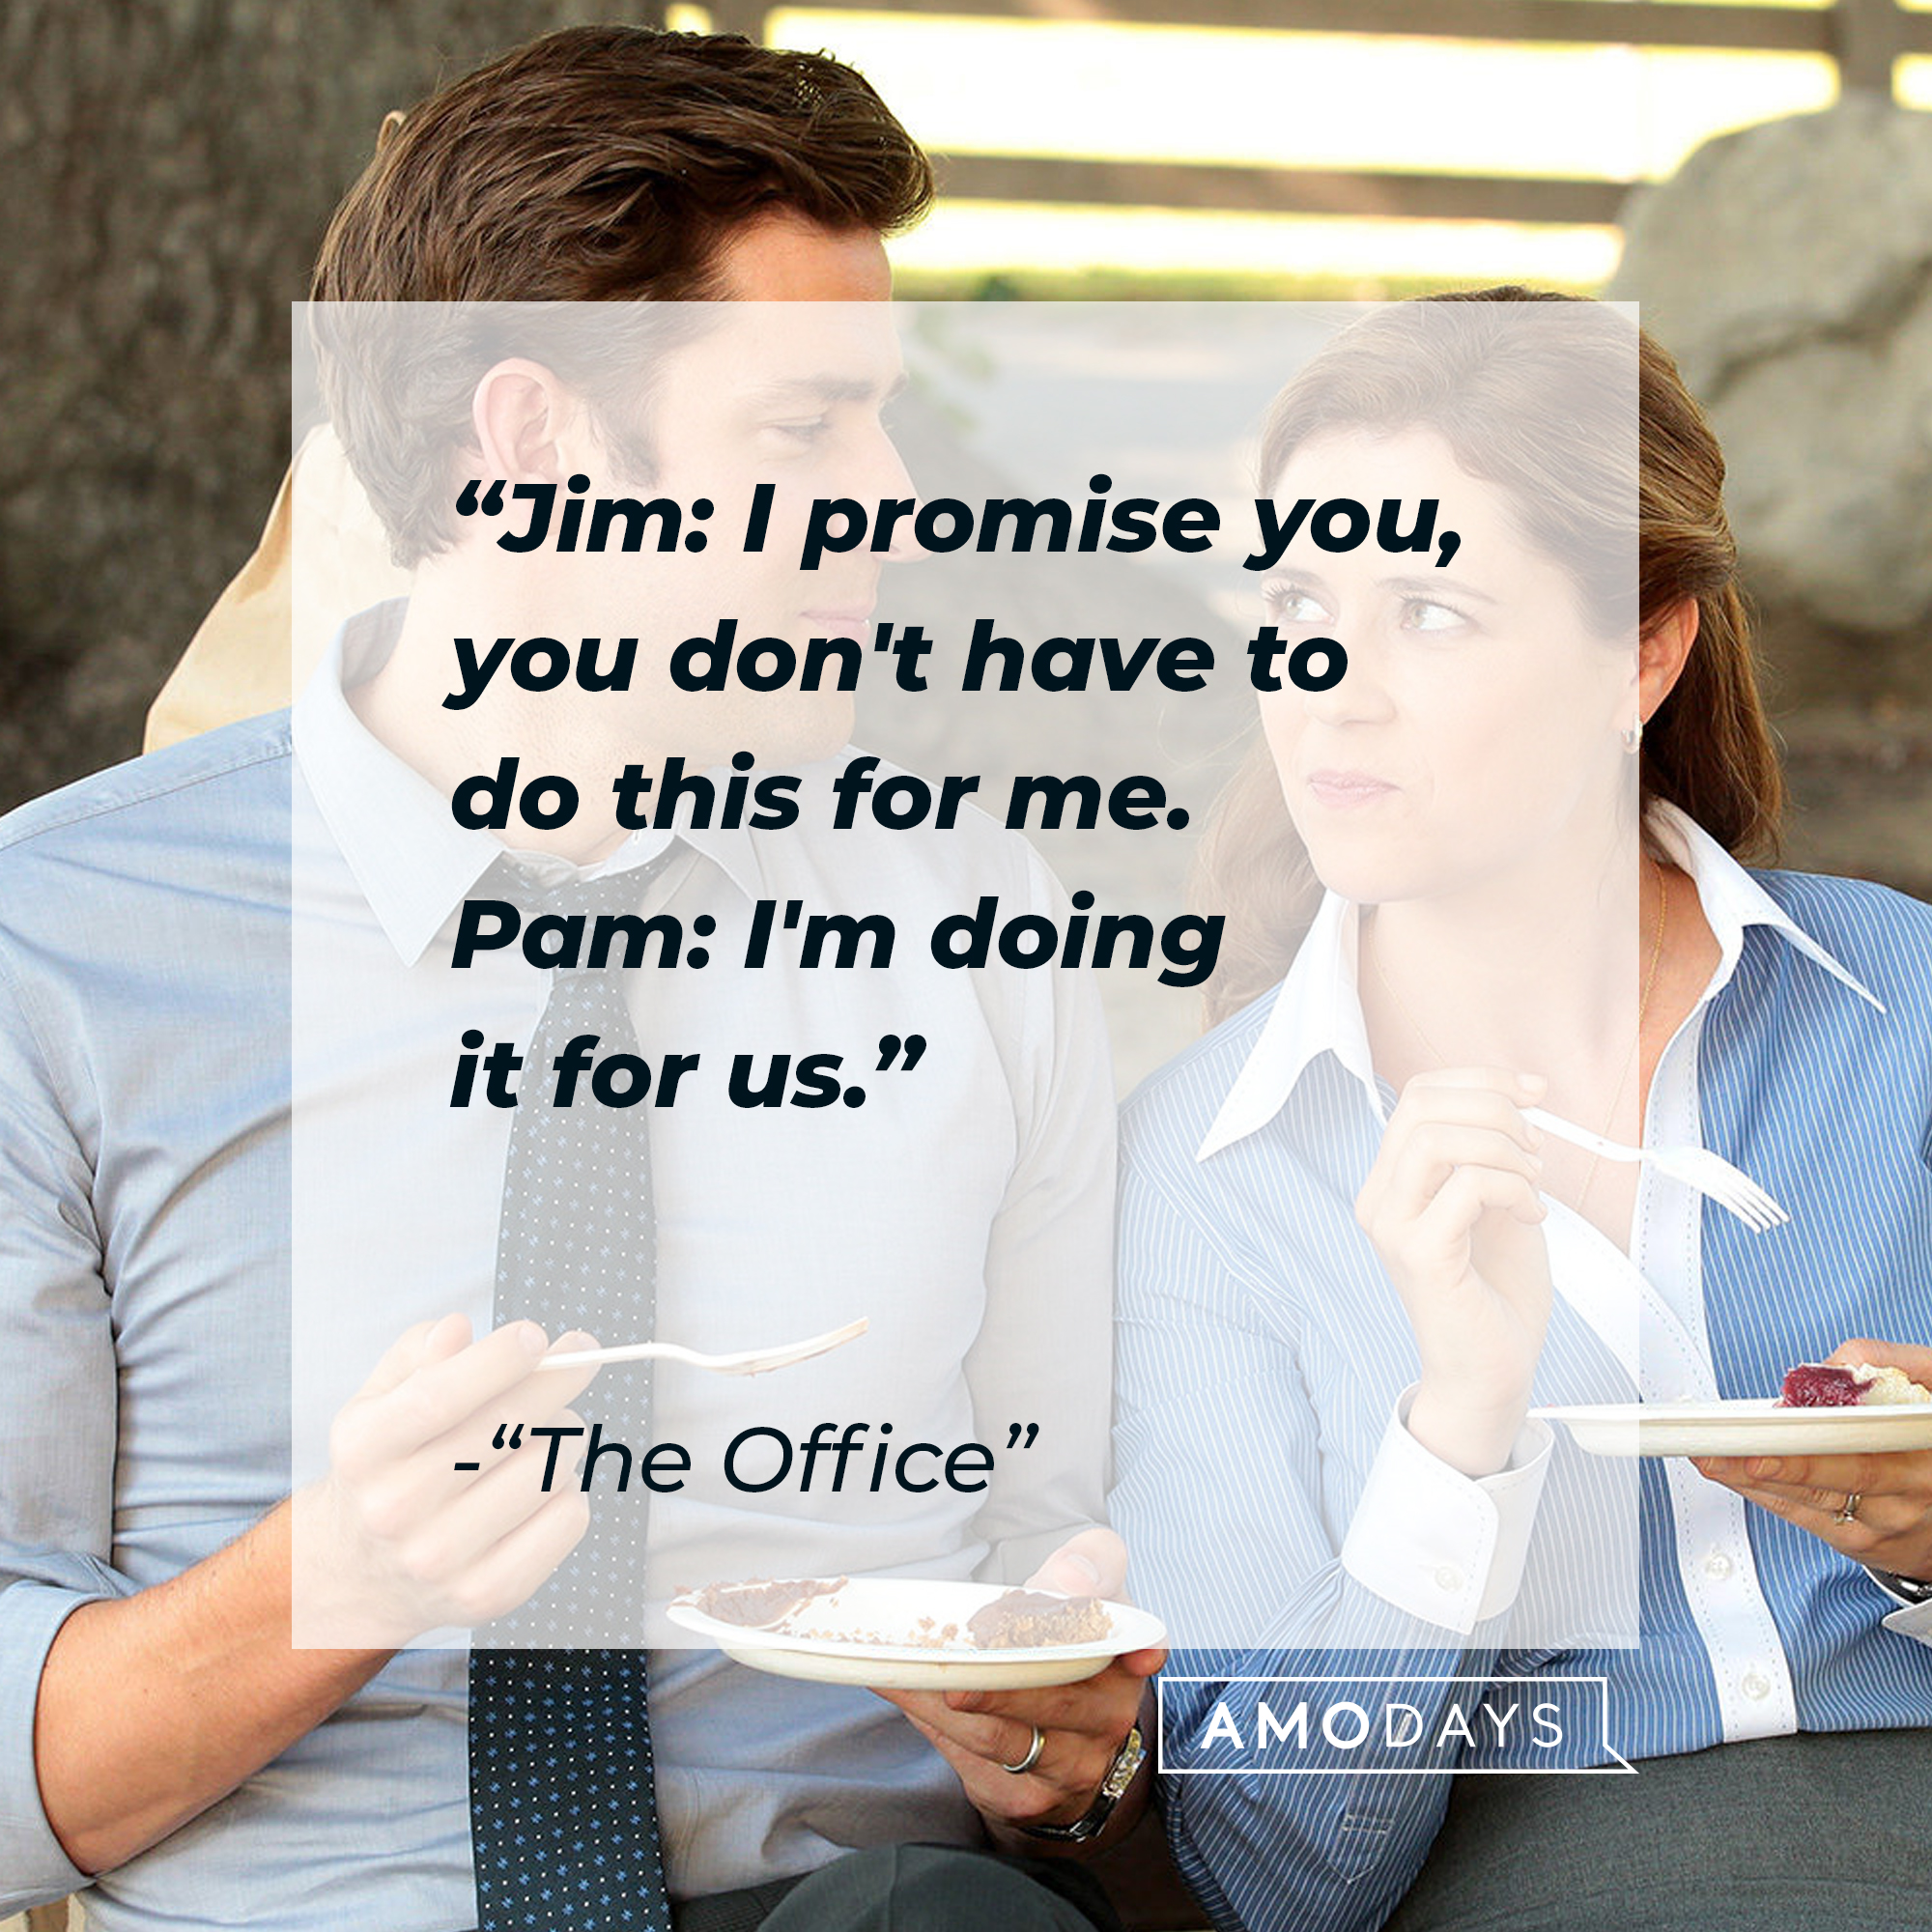 Jim and Pam with the dialogue, "Jim: I promise you, you don't have to do this for me. Pam: I'm doing it for us." | Source: Facebook/TheOfficeTV